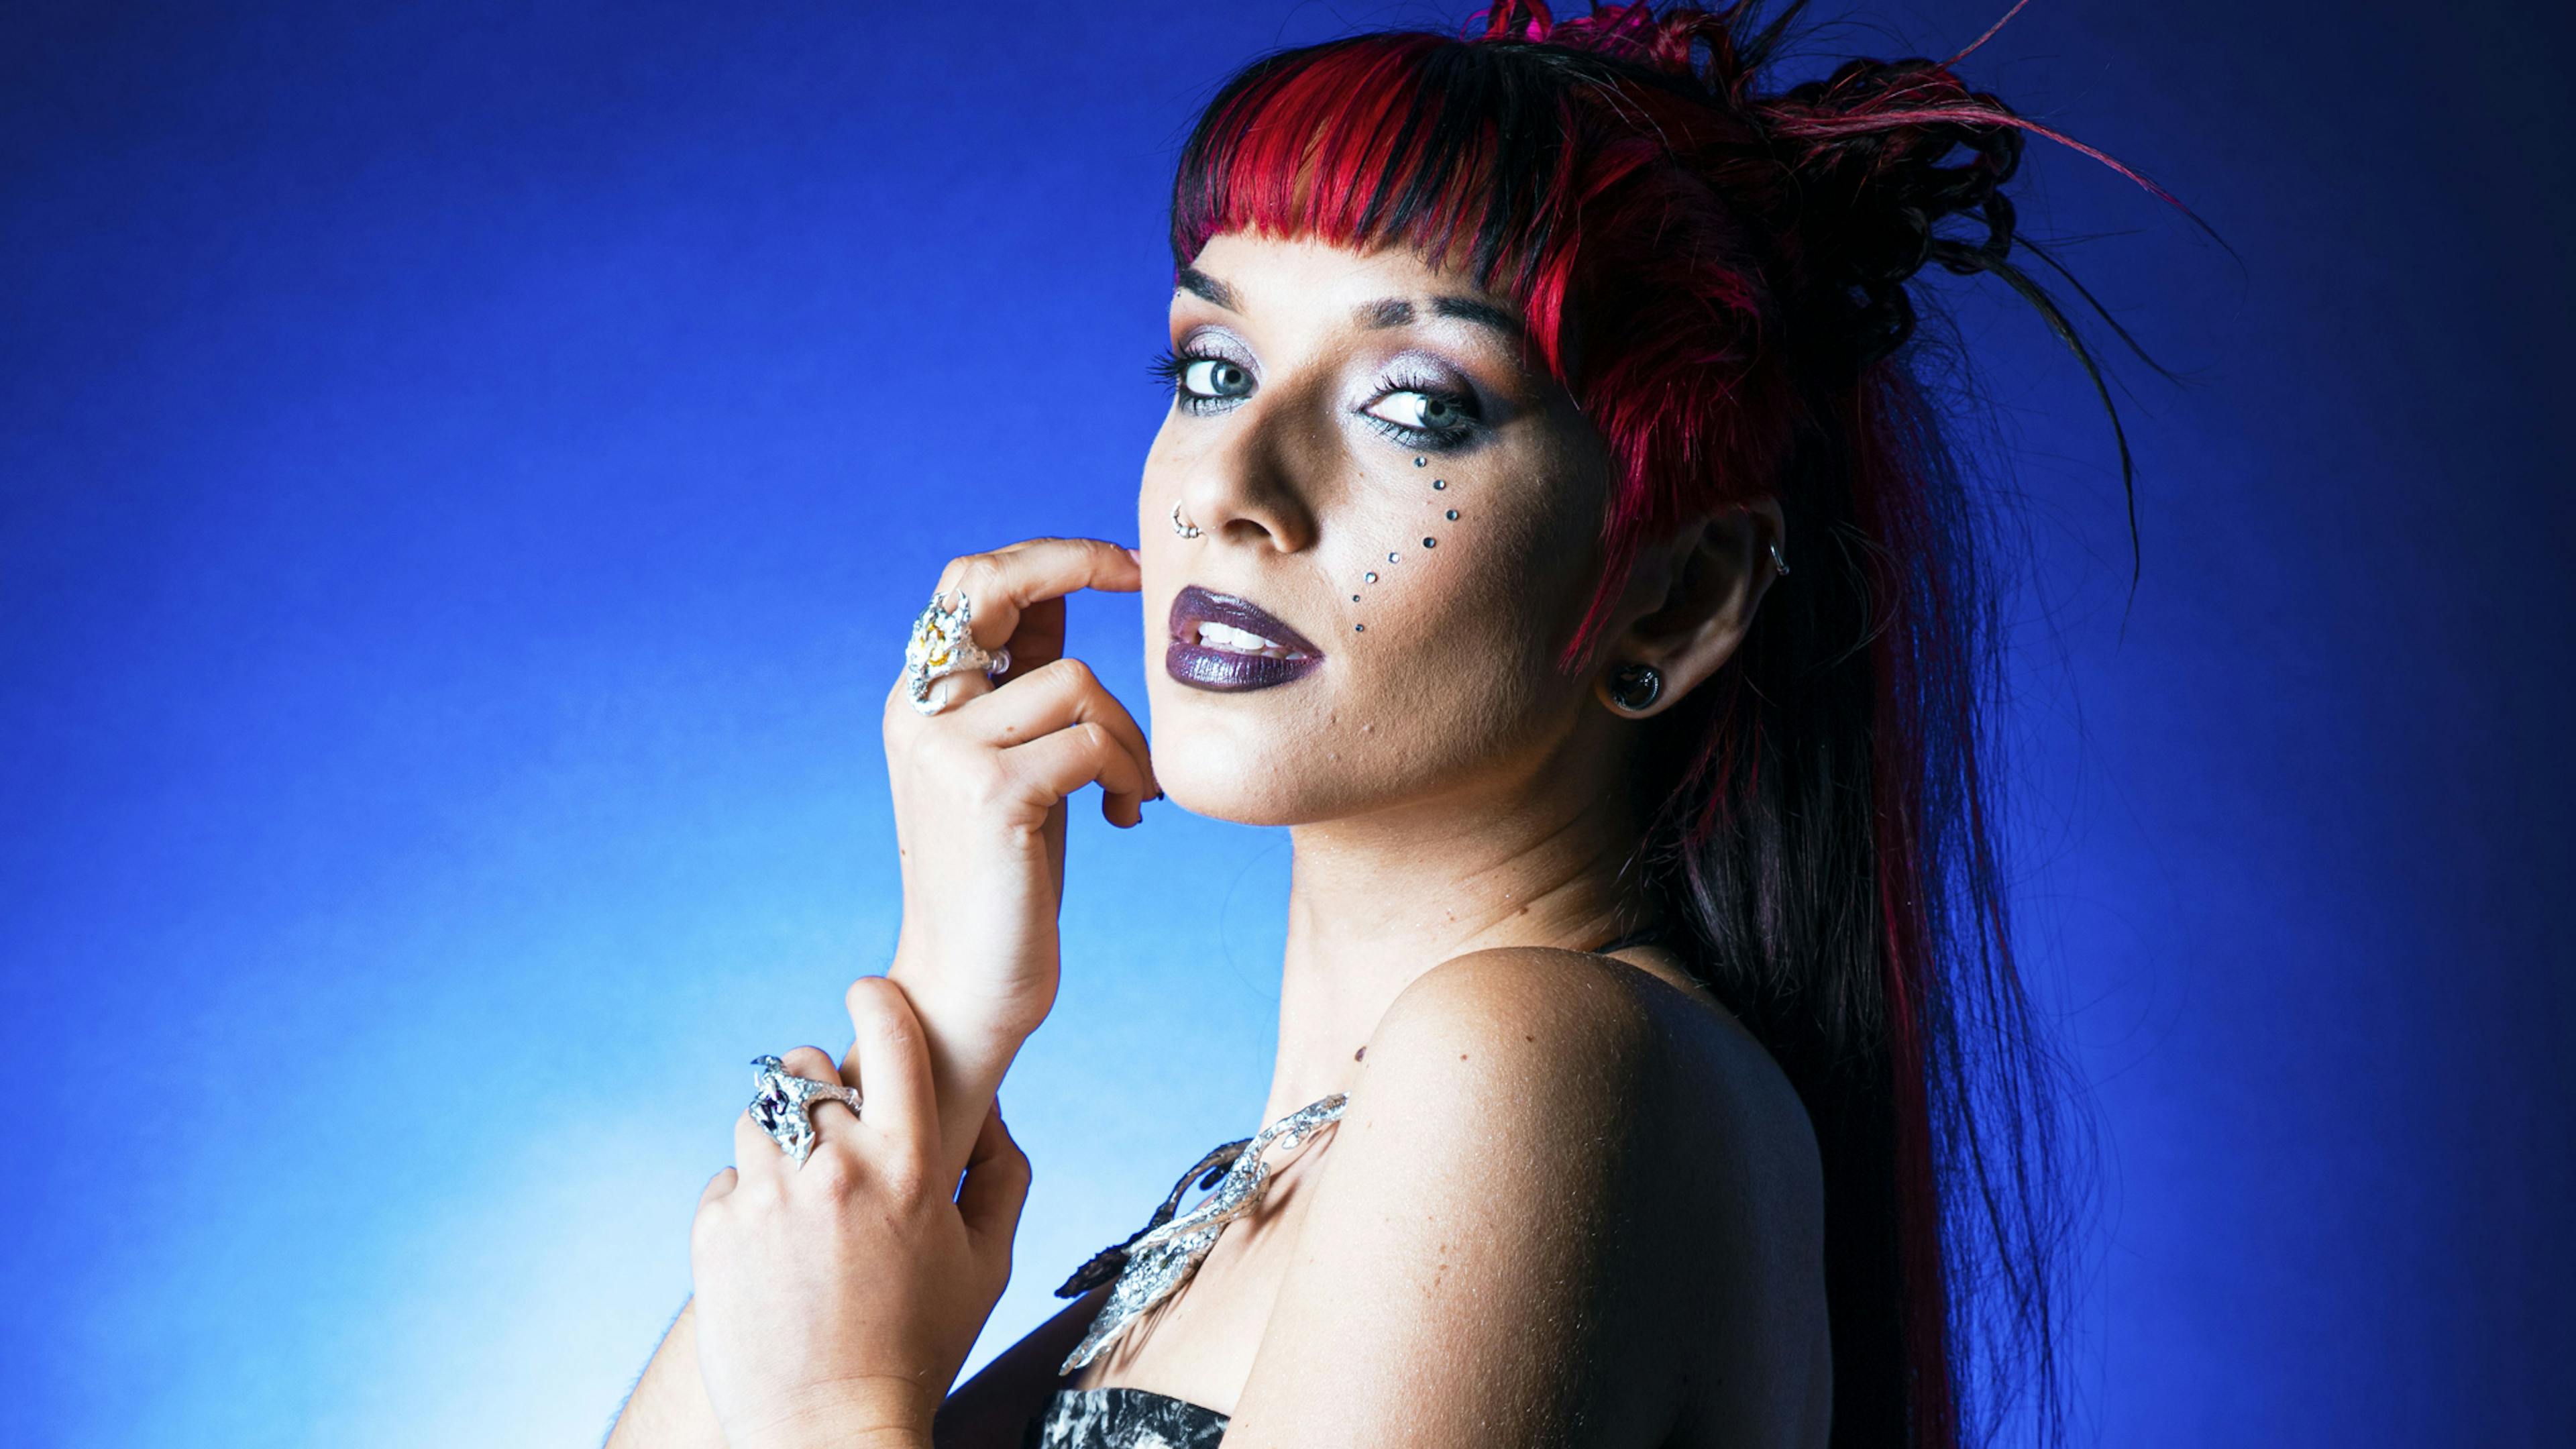 Delilah Bon: “People’s responses to my music has given me fuel. I’ve not even started yet!”